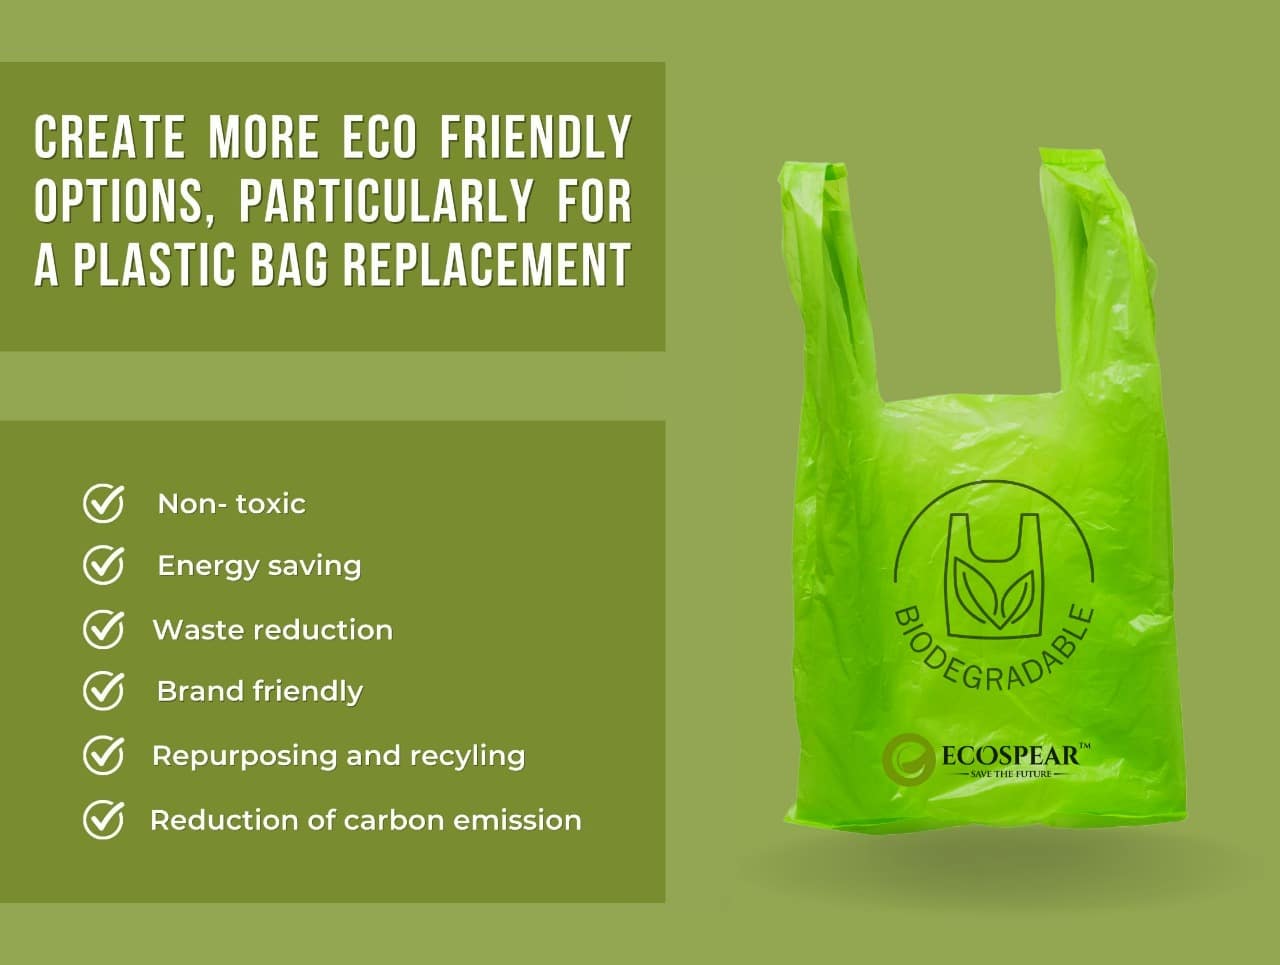 Can Biodegradable Bag Really Help the Planet? - Ecospearbd